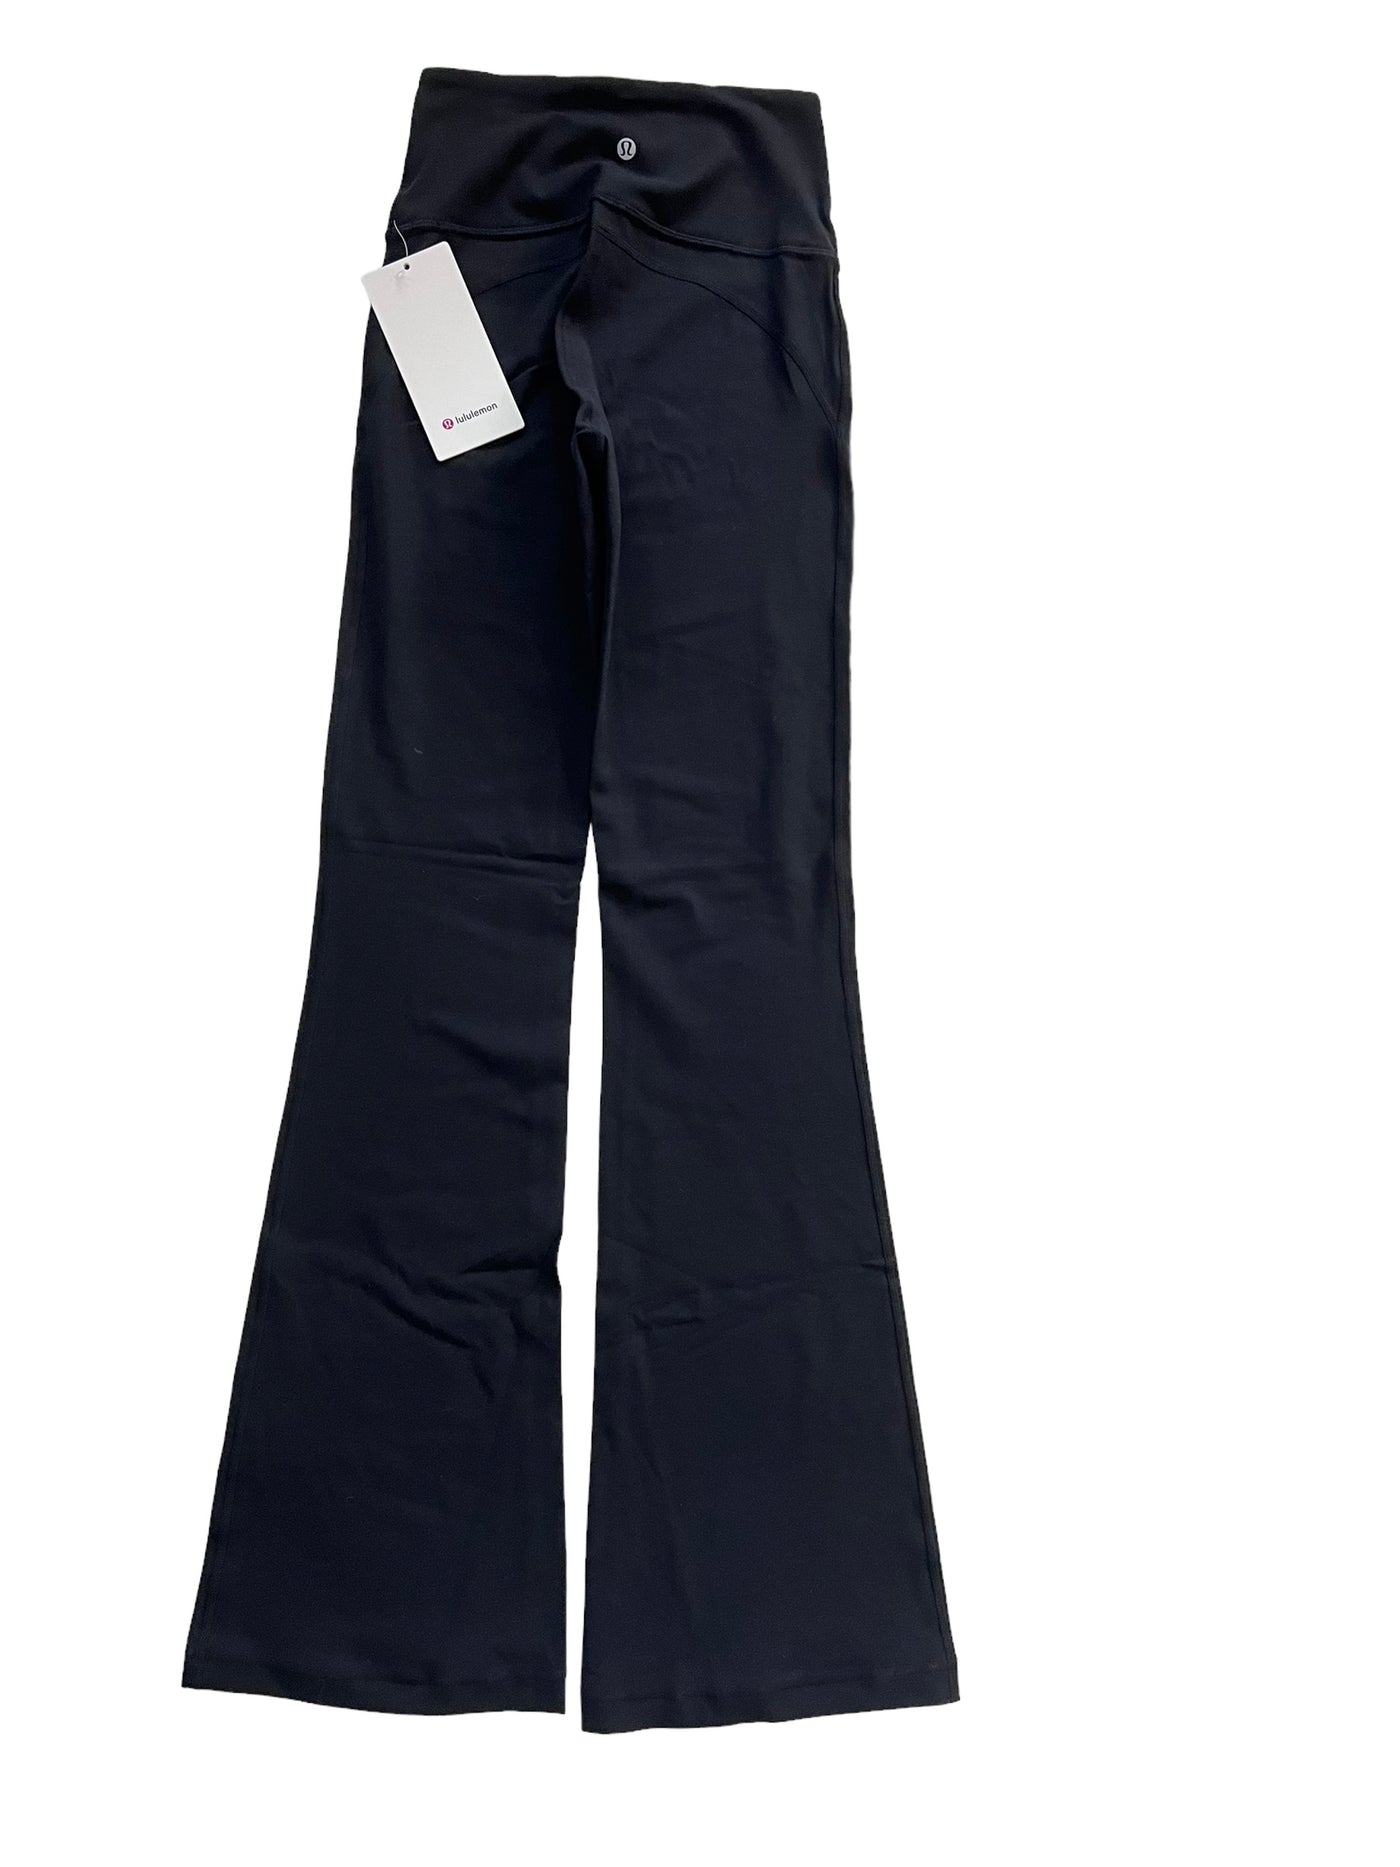 Groove Flare Pant, Super High Rise